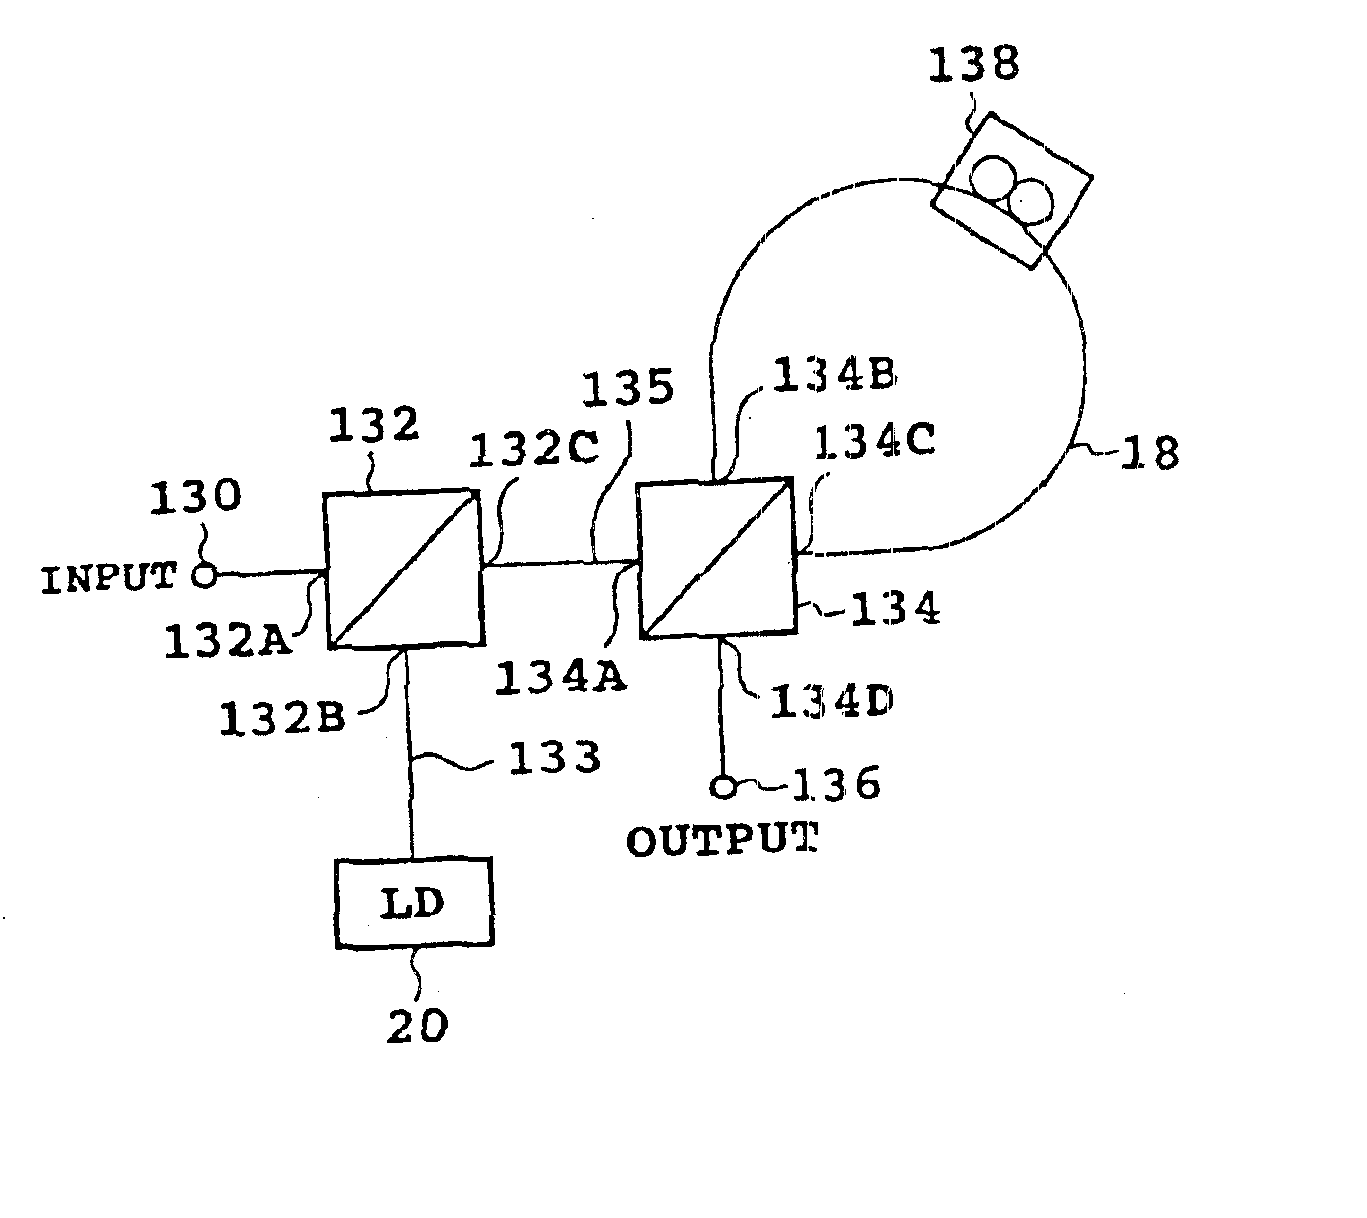 Optical fiber communication system using optical phase conjugation as well as apparatus applicable to the system and method of producing the same